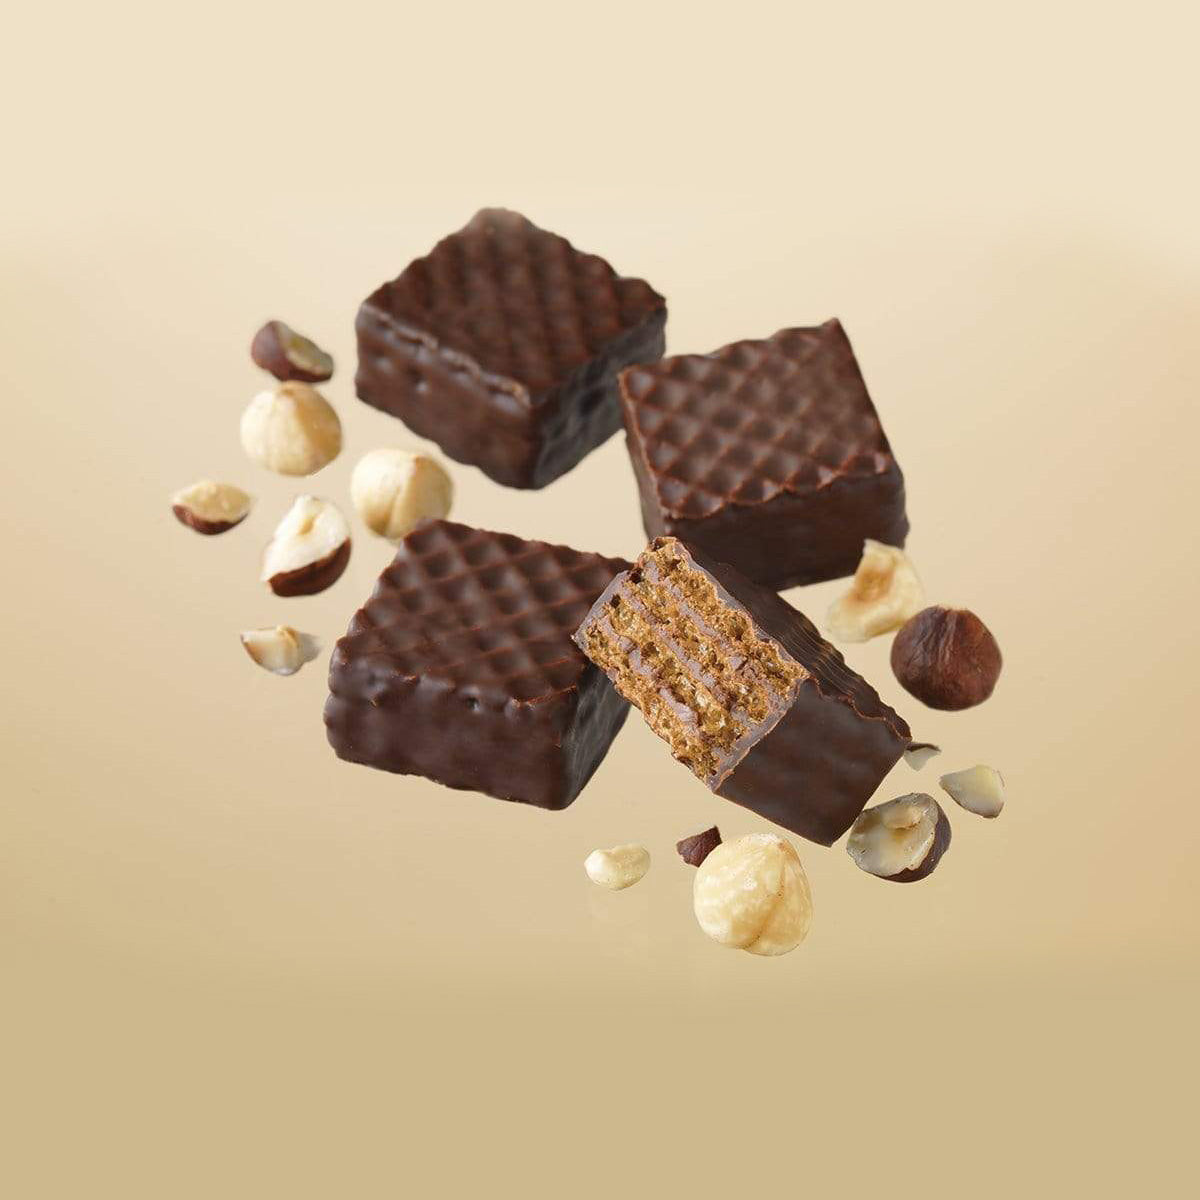 ROYCE' Chocolate - Chocolate Wafers "Hazel Cream" - Image shows brown chocolate wafers with a crisscrossed texture and accents of hazelnuts. Background is in light brown. 